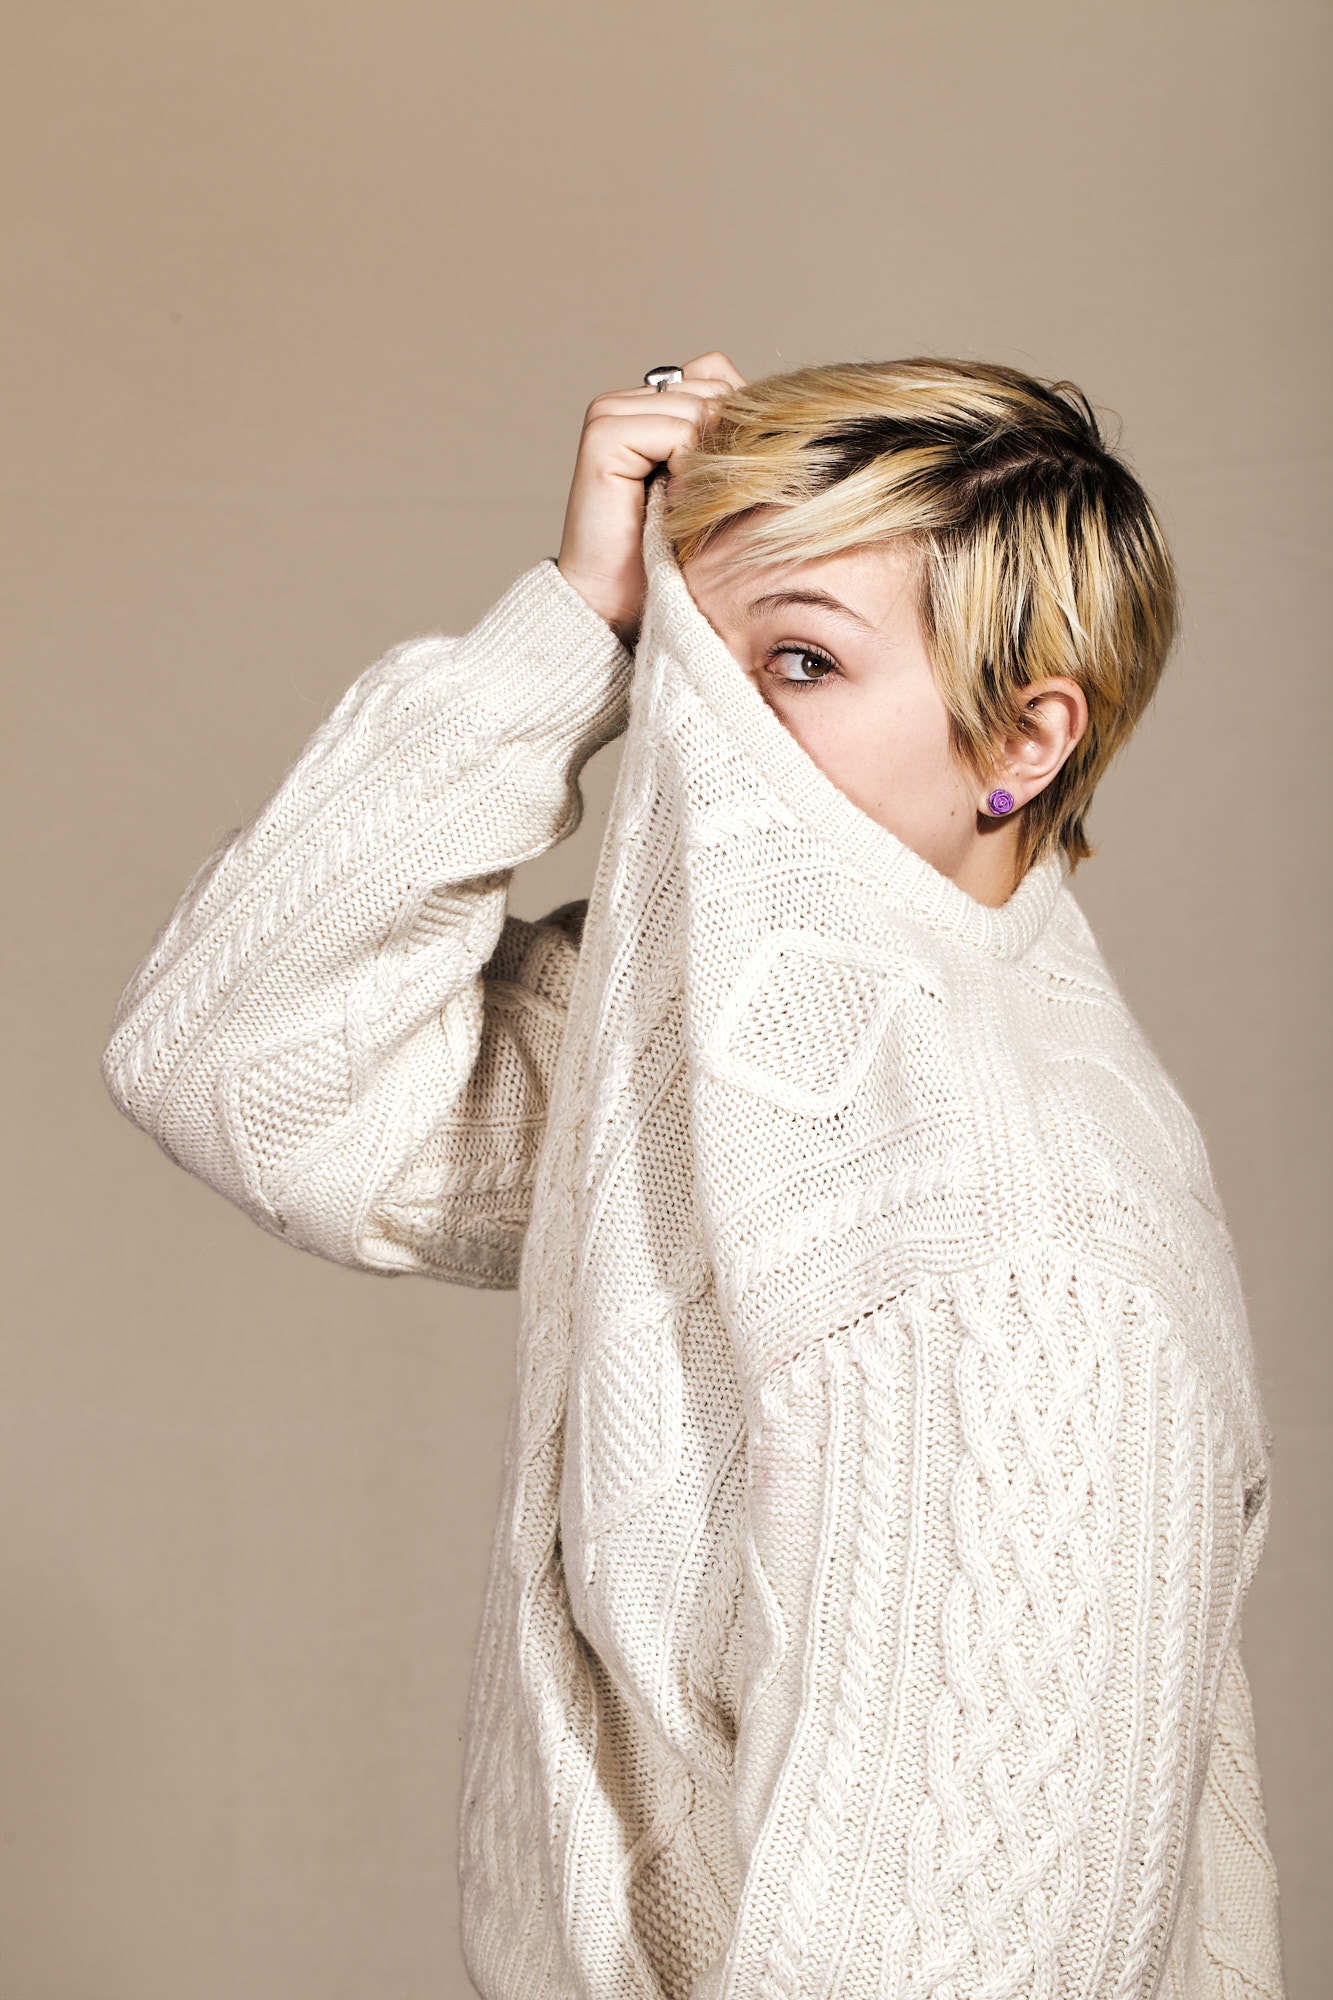 Editorial portrait of woman with short blonde hair wearing knitted sweater